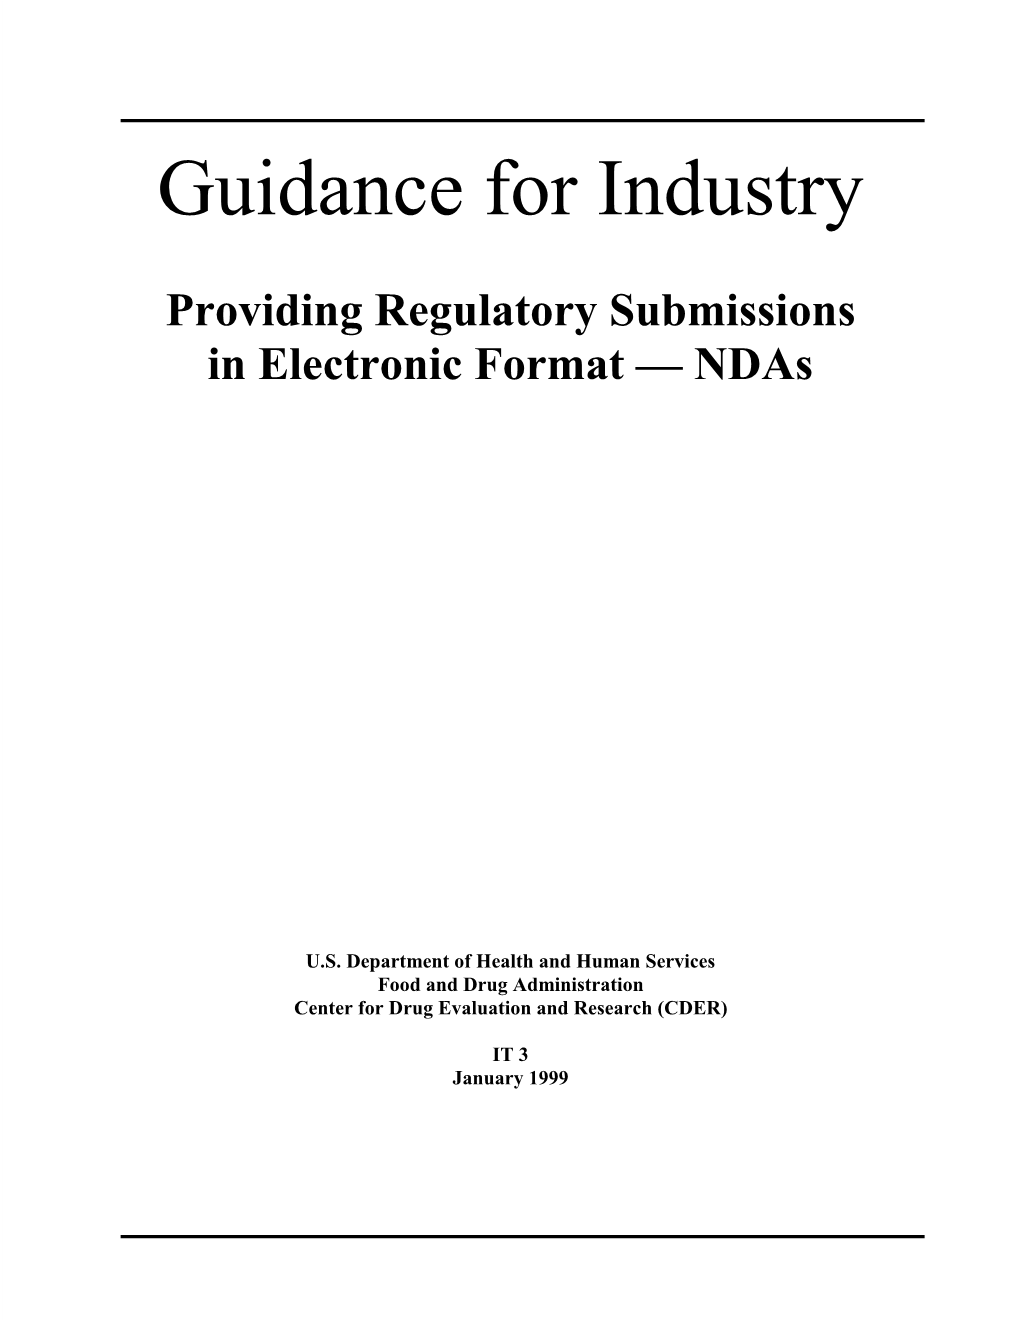 New Drug Applications (Ndas) and Supplements and Amendments to Those Applications to CDER